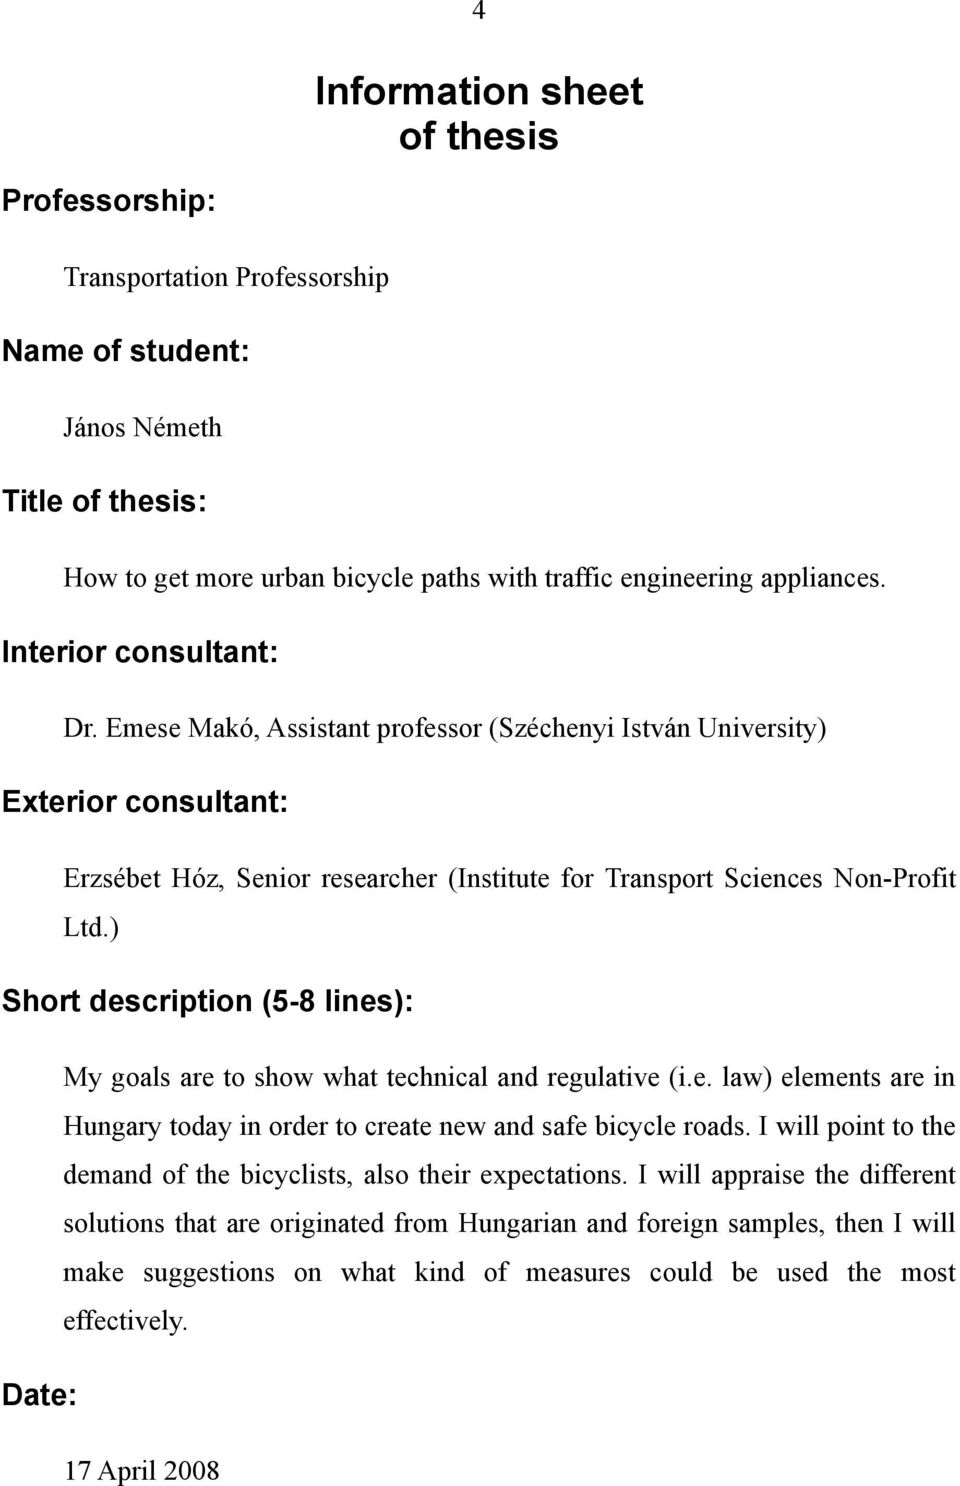 ) Short description (5-8 lines): My goals are to show what technical and regulative (i.e. law) elements are in Hungary today in order to create new and safe bicycle roads.